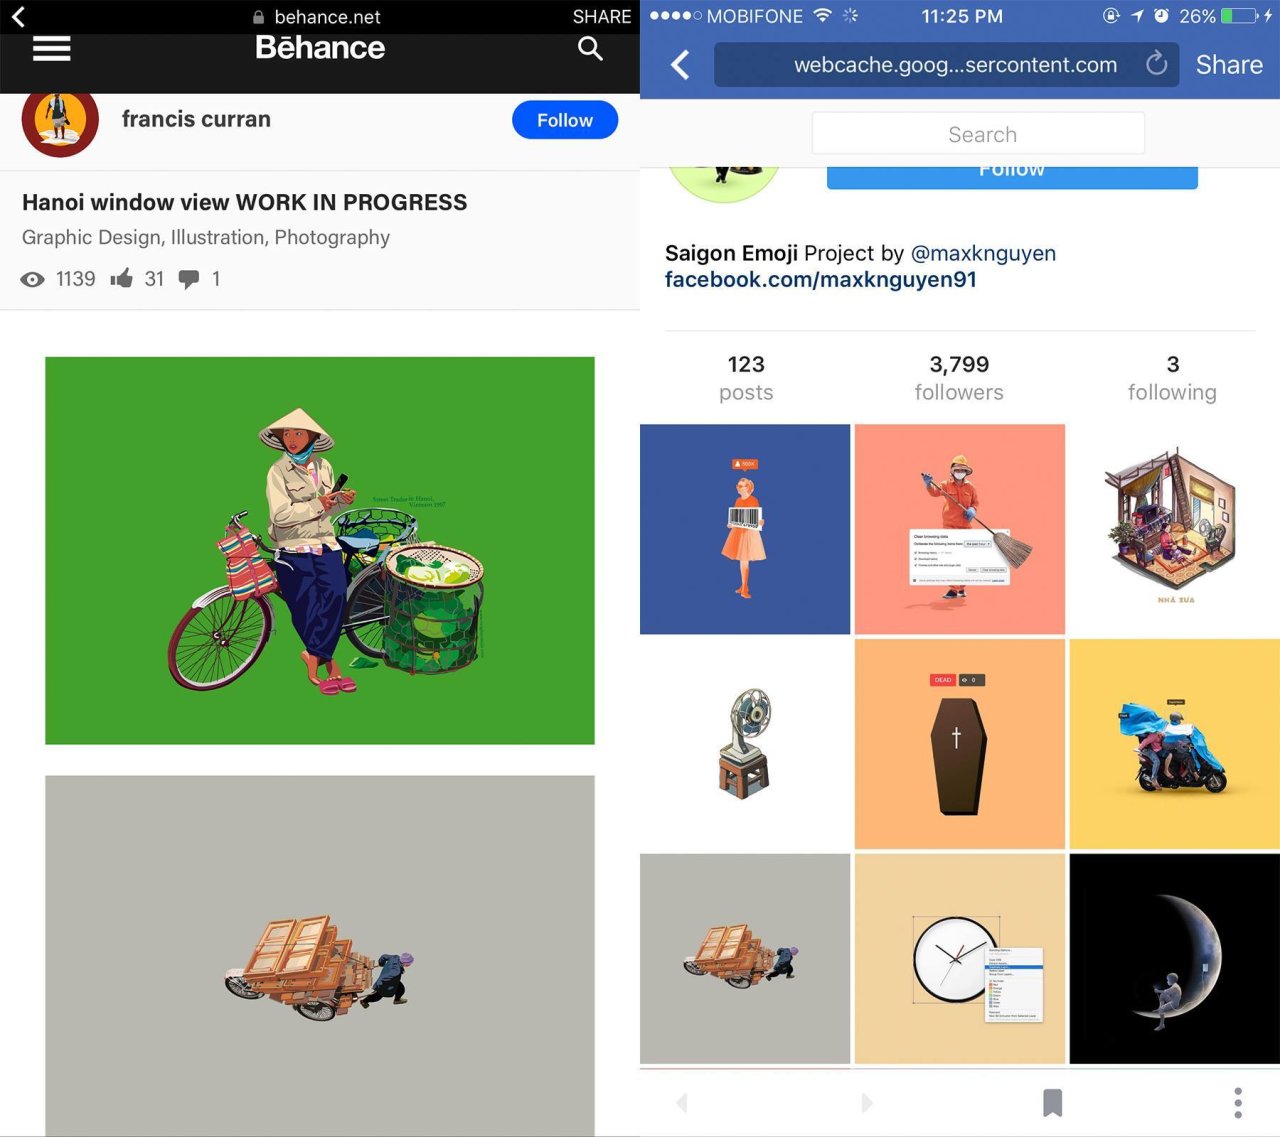 A work by Francis Curran (down left) is replicated in the Saigon Emoji project (right) by Maxk Nguyen without credit given to the original artist.